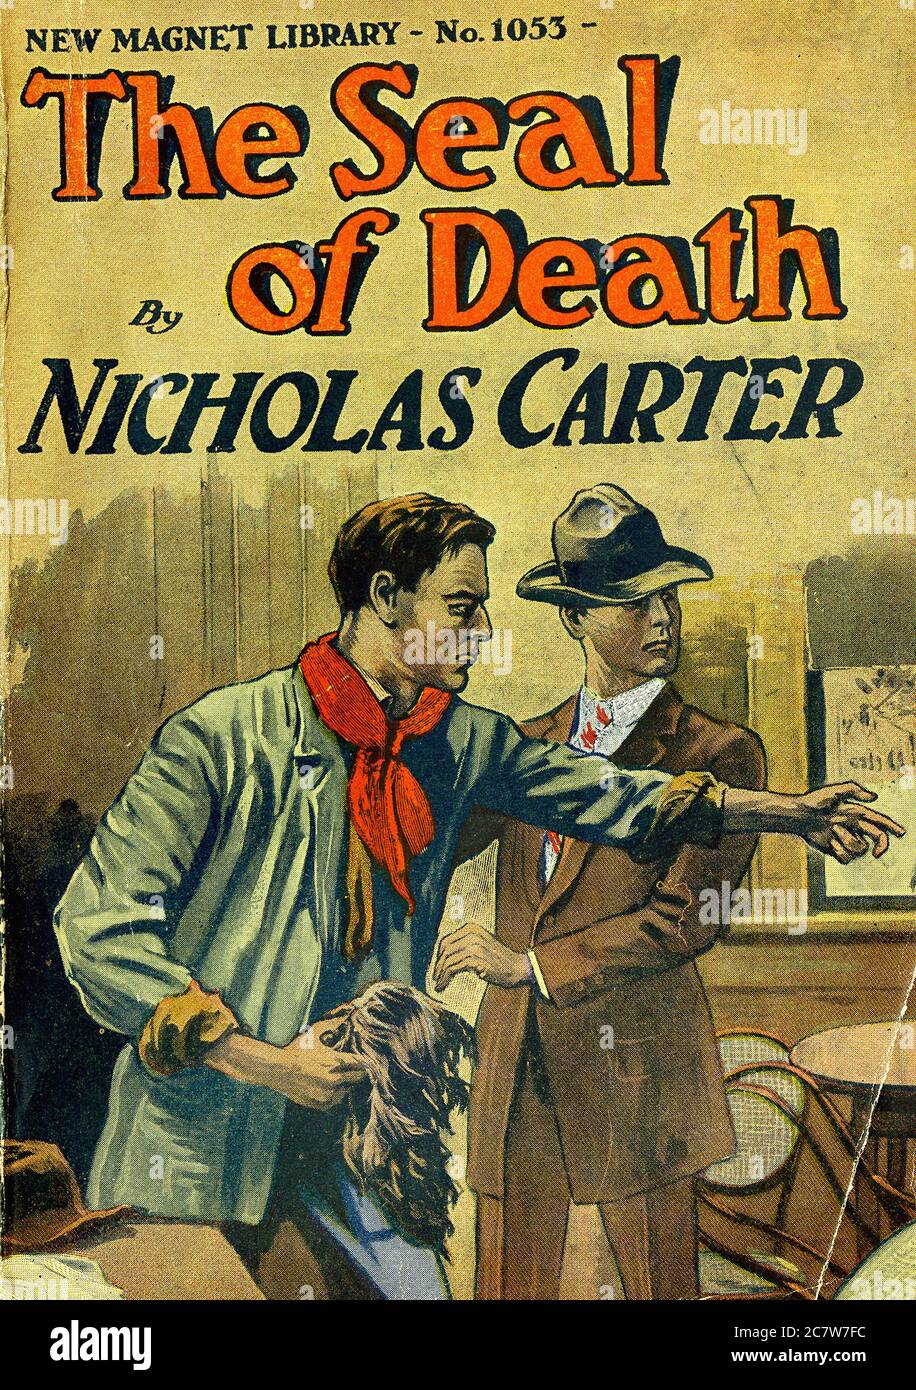 Nicholas Carter - The Seal of Death - New Magnet Library - Vintage Pulp Literary Stock Photo